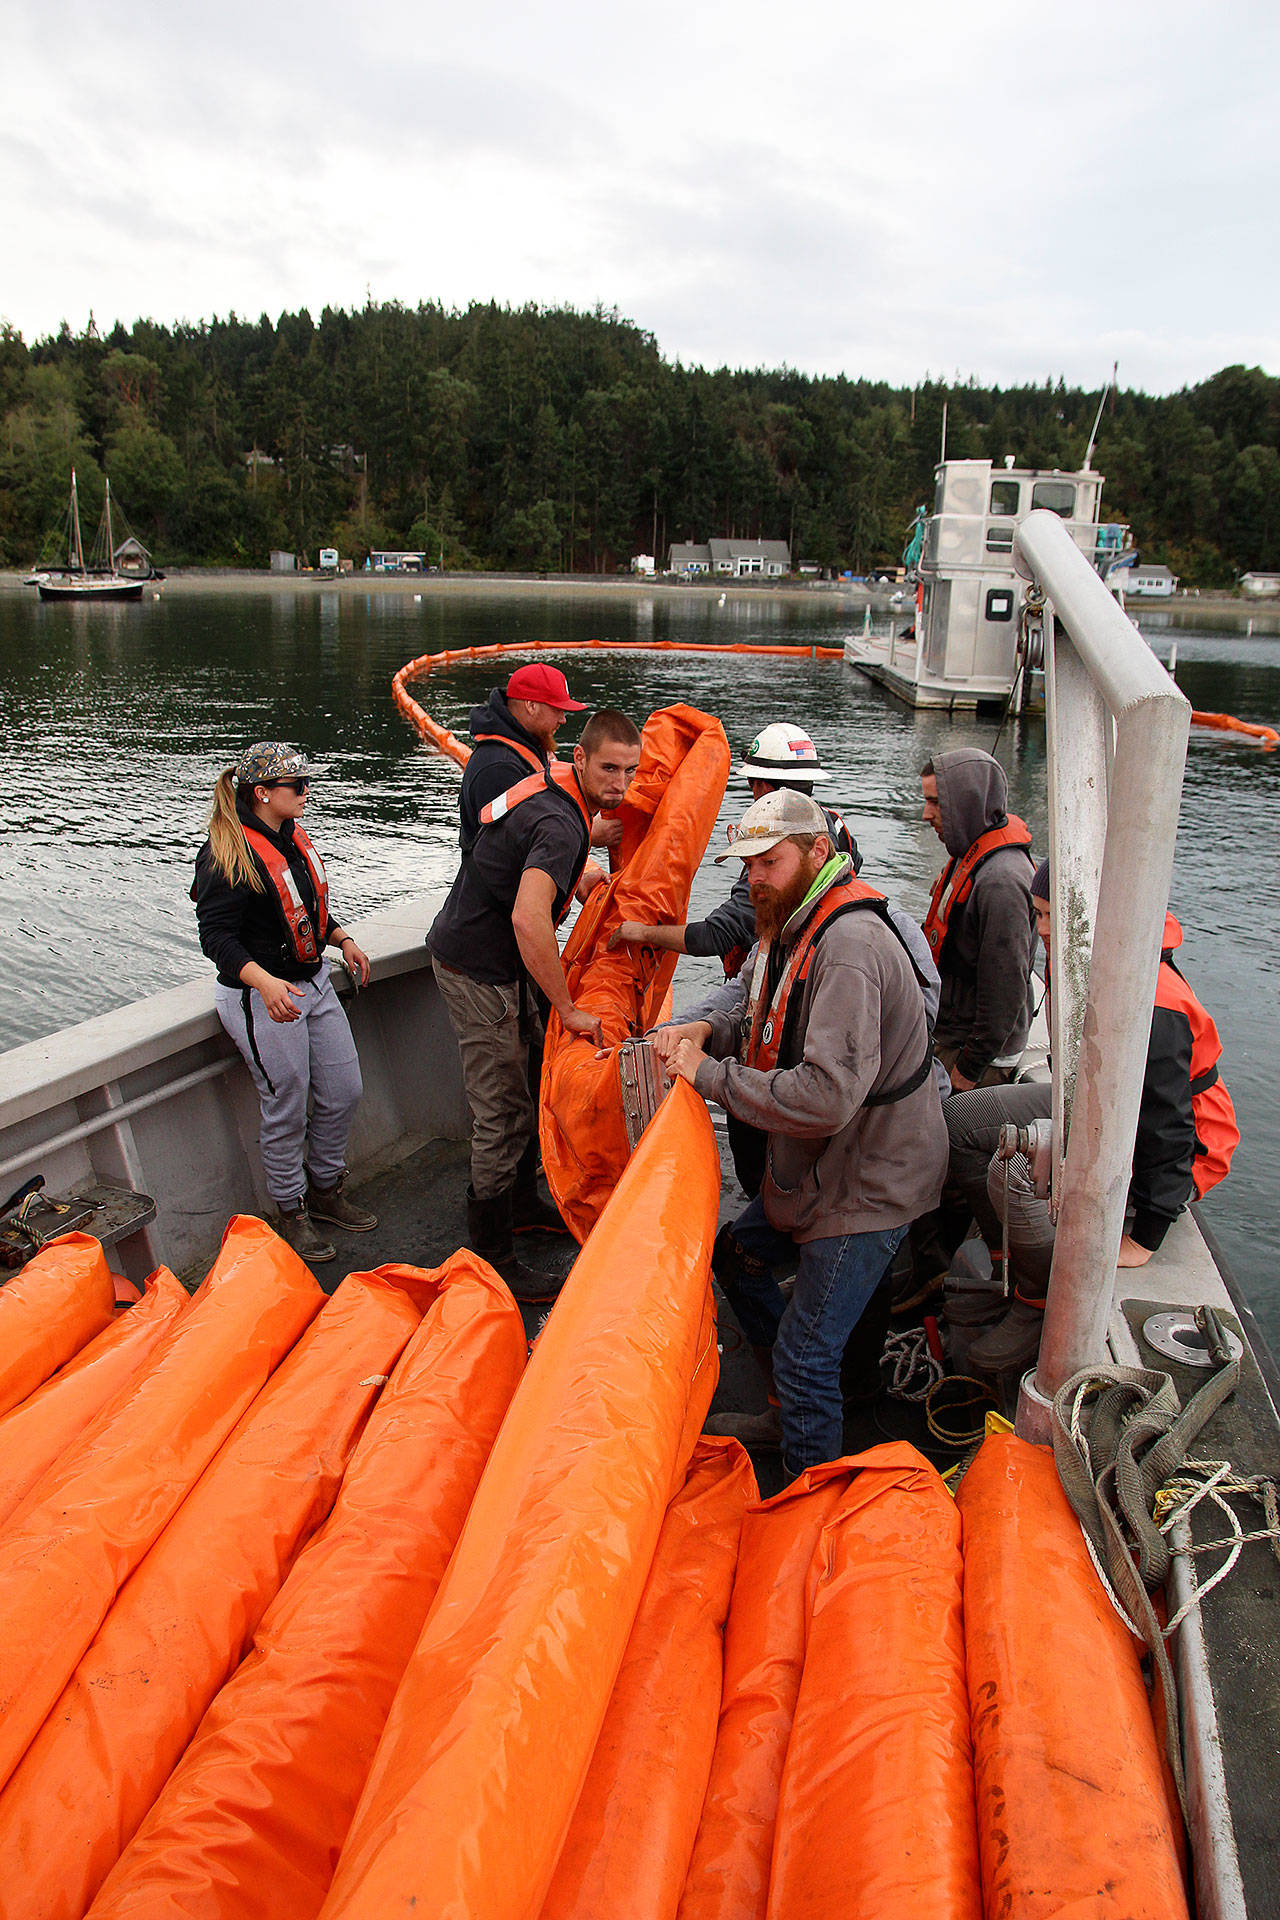 From left, Natalie Wagoner, Jay Dassow, Jeremiah Tumulty and Brandon Andrews help National Response Corporation deckhand Tyler Millius retrieve an oil boom during a training exercise last Friday afternoon. Photo by Laura Guido/Whidbey News-Times